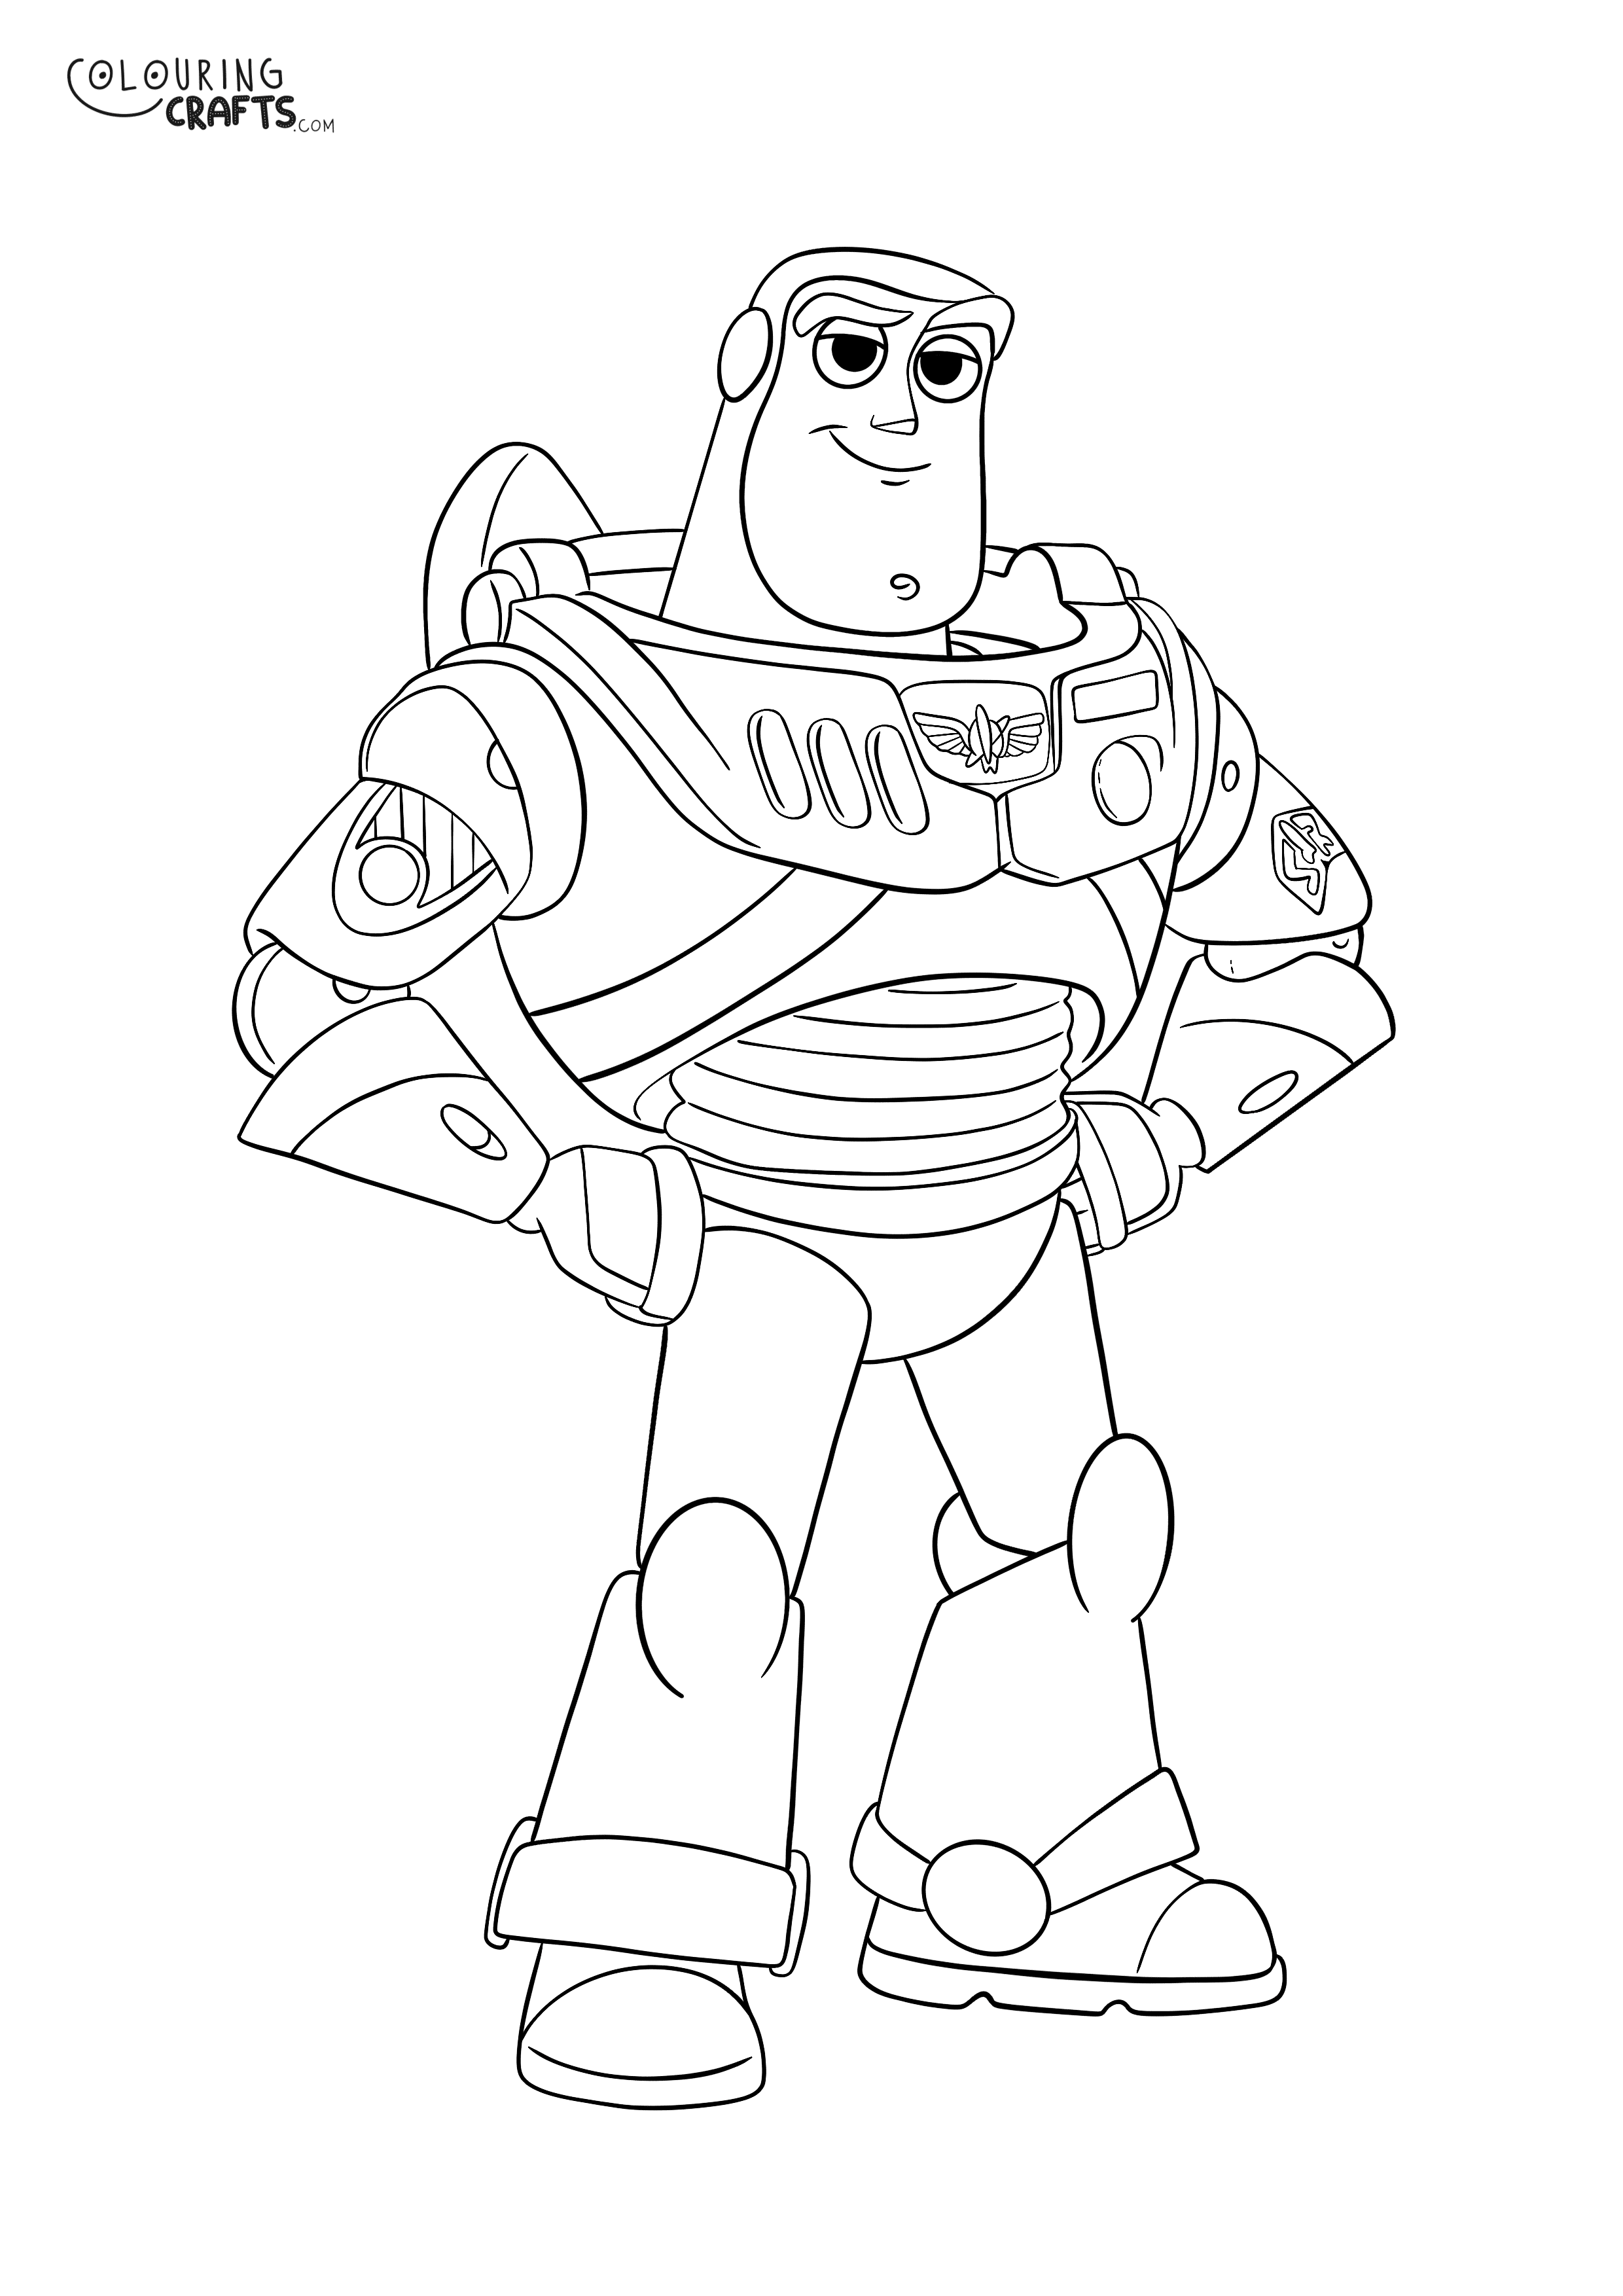 Toy Story Buzz Colouring Page - Colouring Crafts